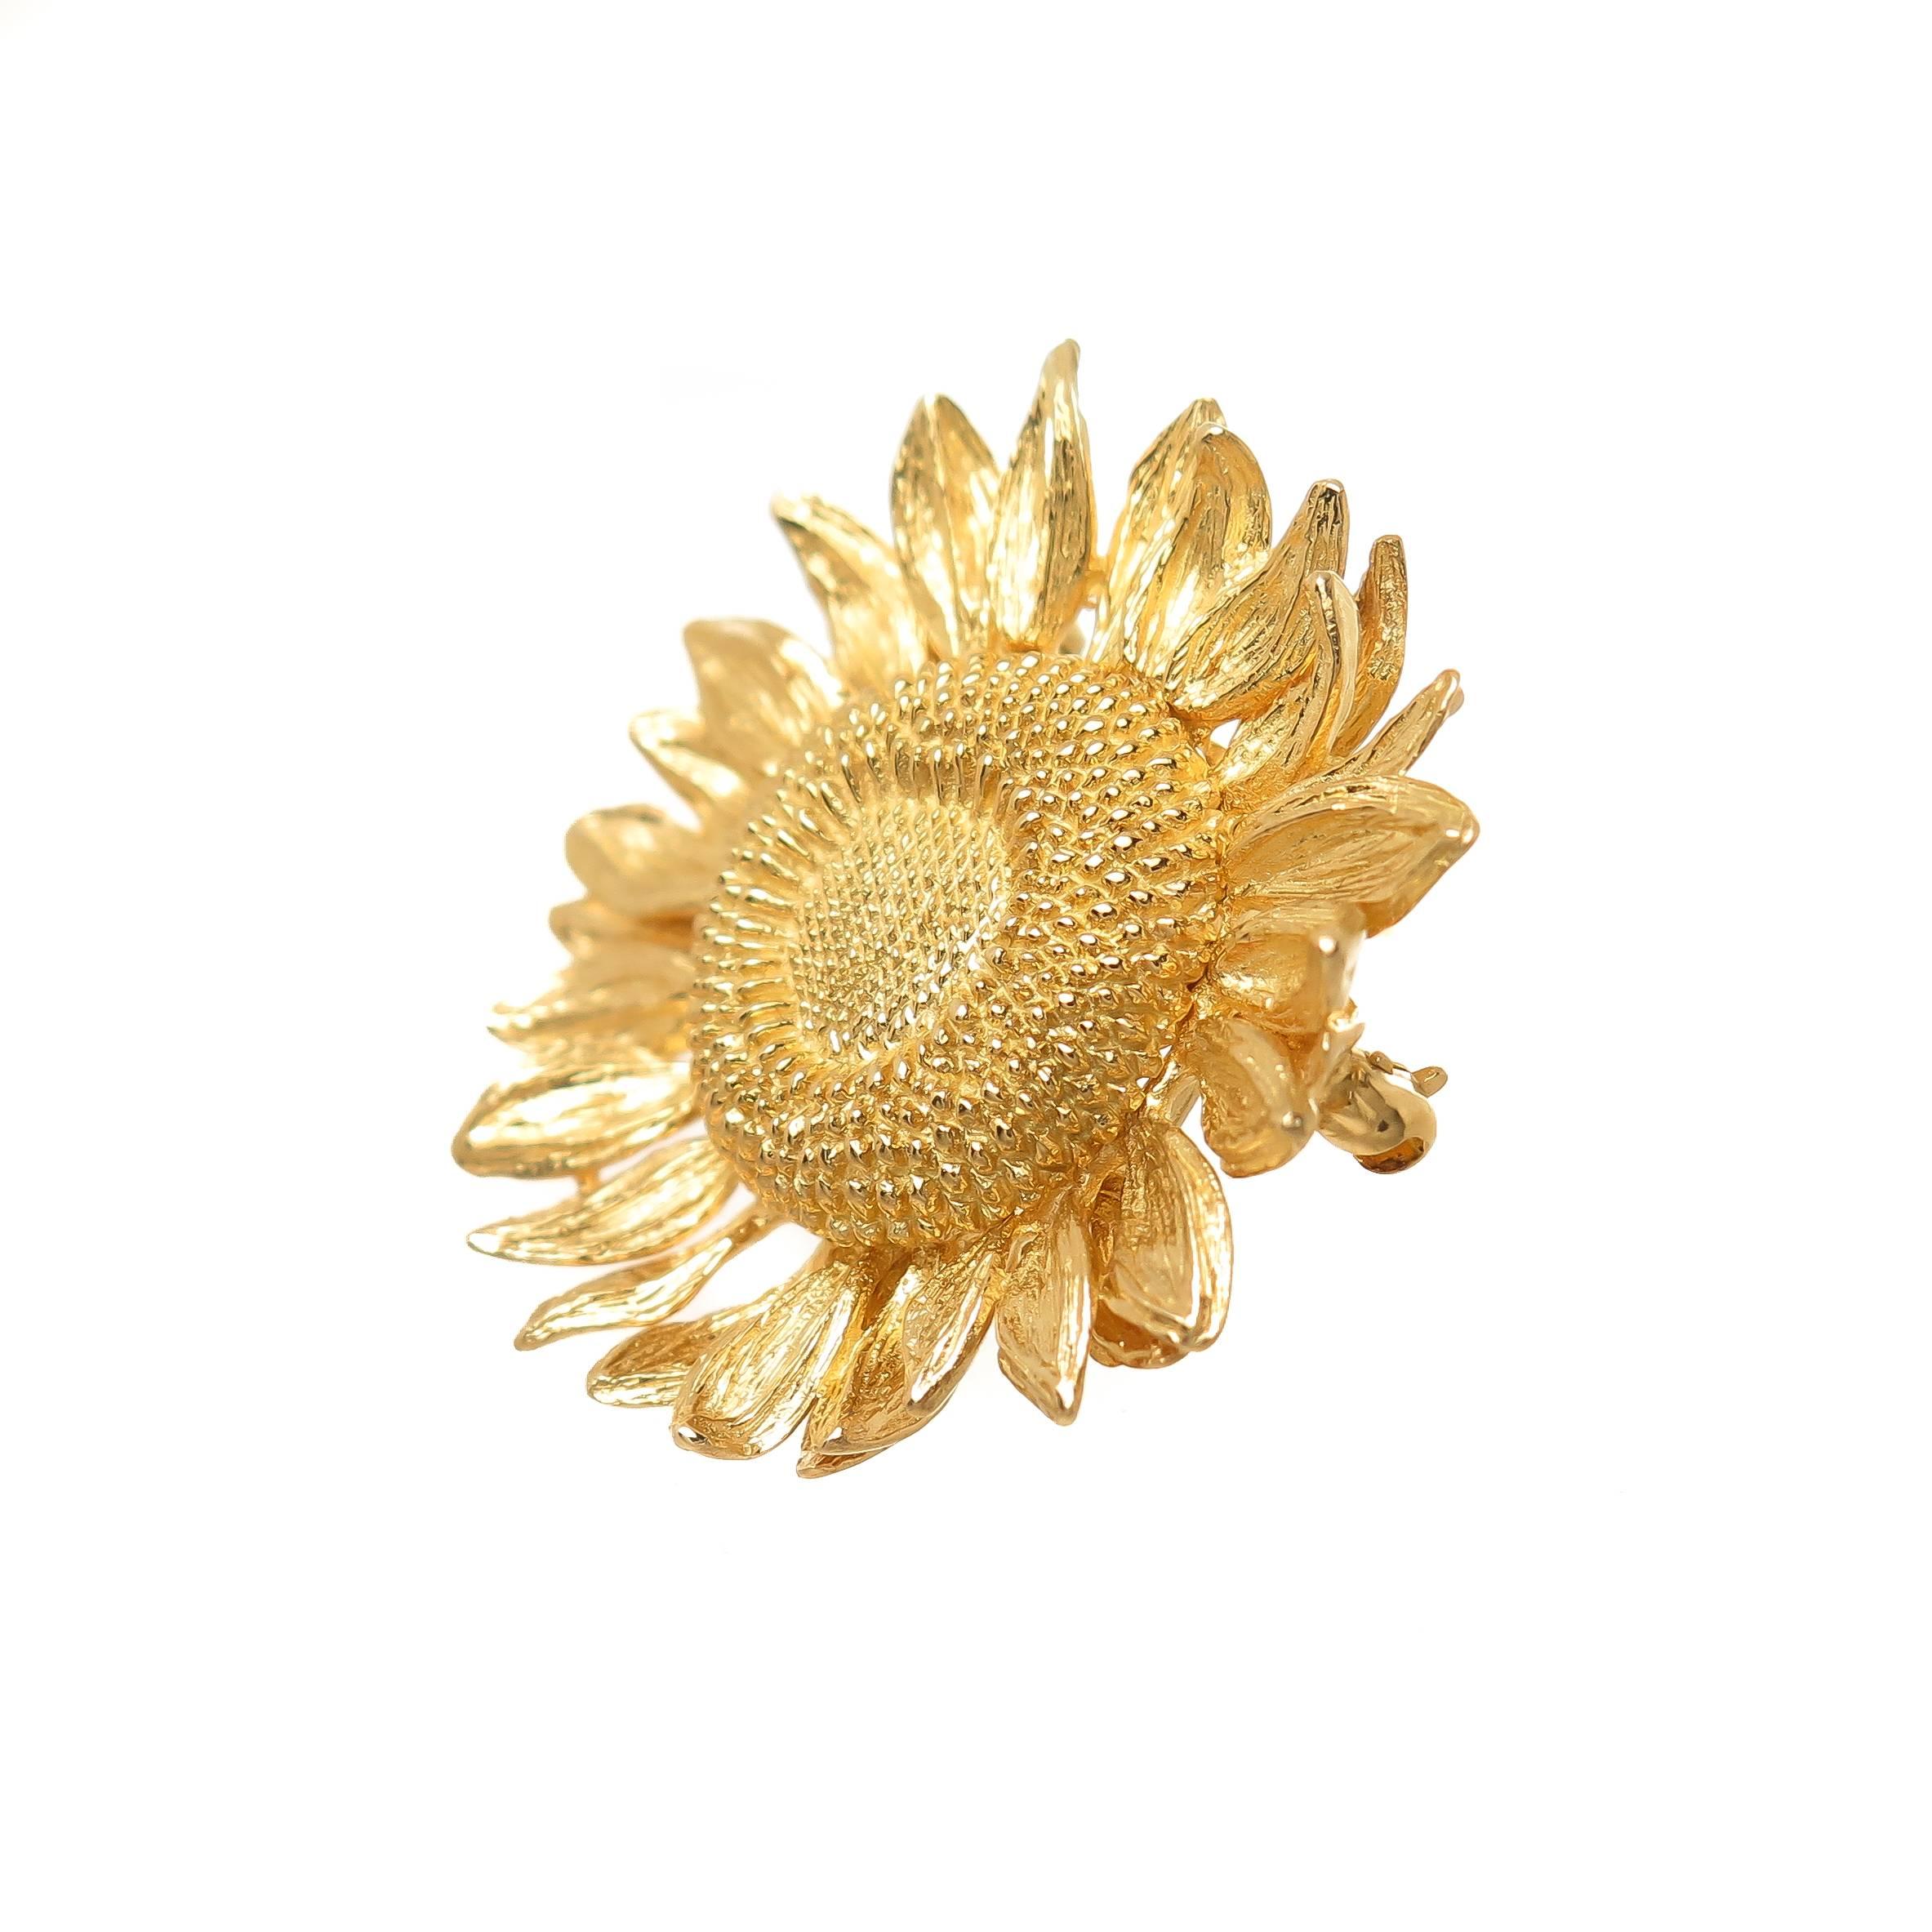 Circa 2005 Asprey of London 18K yellow Gold Sunflower collection Brooch, measuring 1 3/8 inch in Diameter and weighing 18.2 Grams.  Very finely detailed and comes in the original Asprey Presentation Box. 